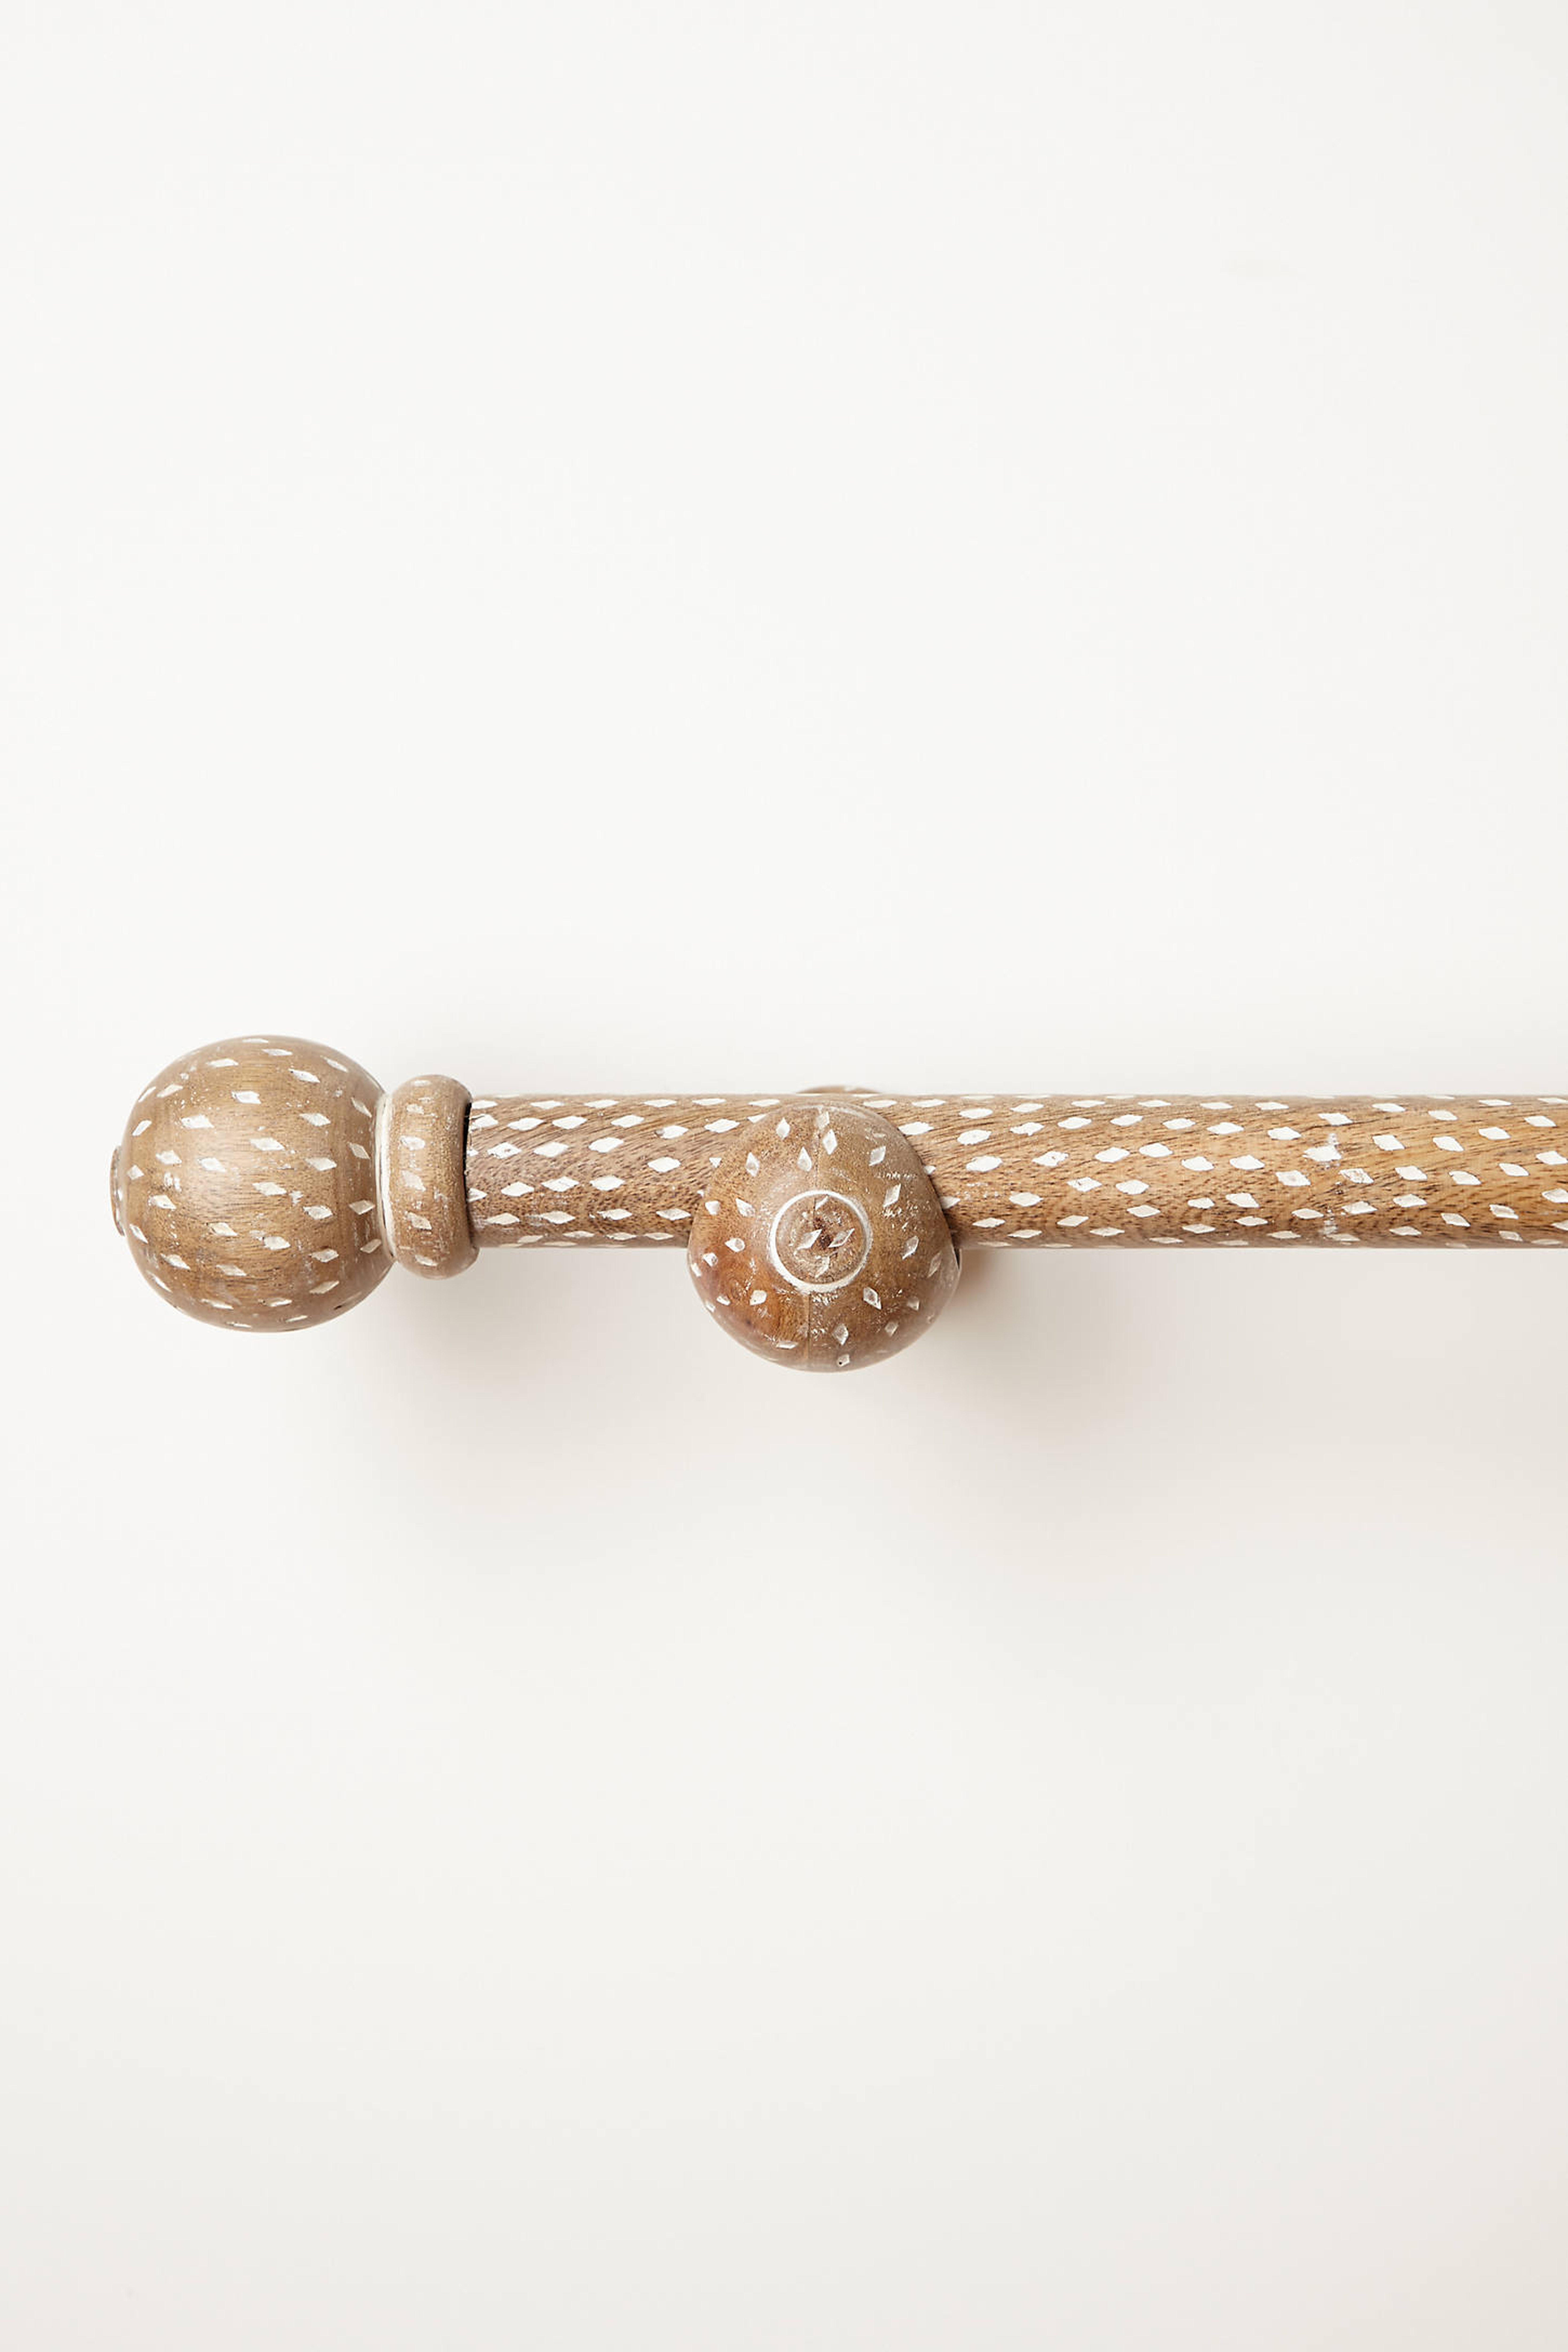 Speckled Wood Curtain Rod - Anthropologie